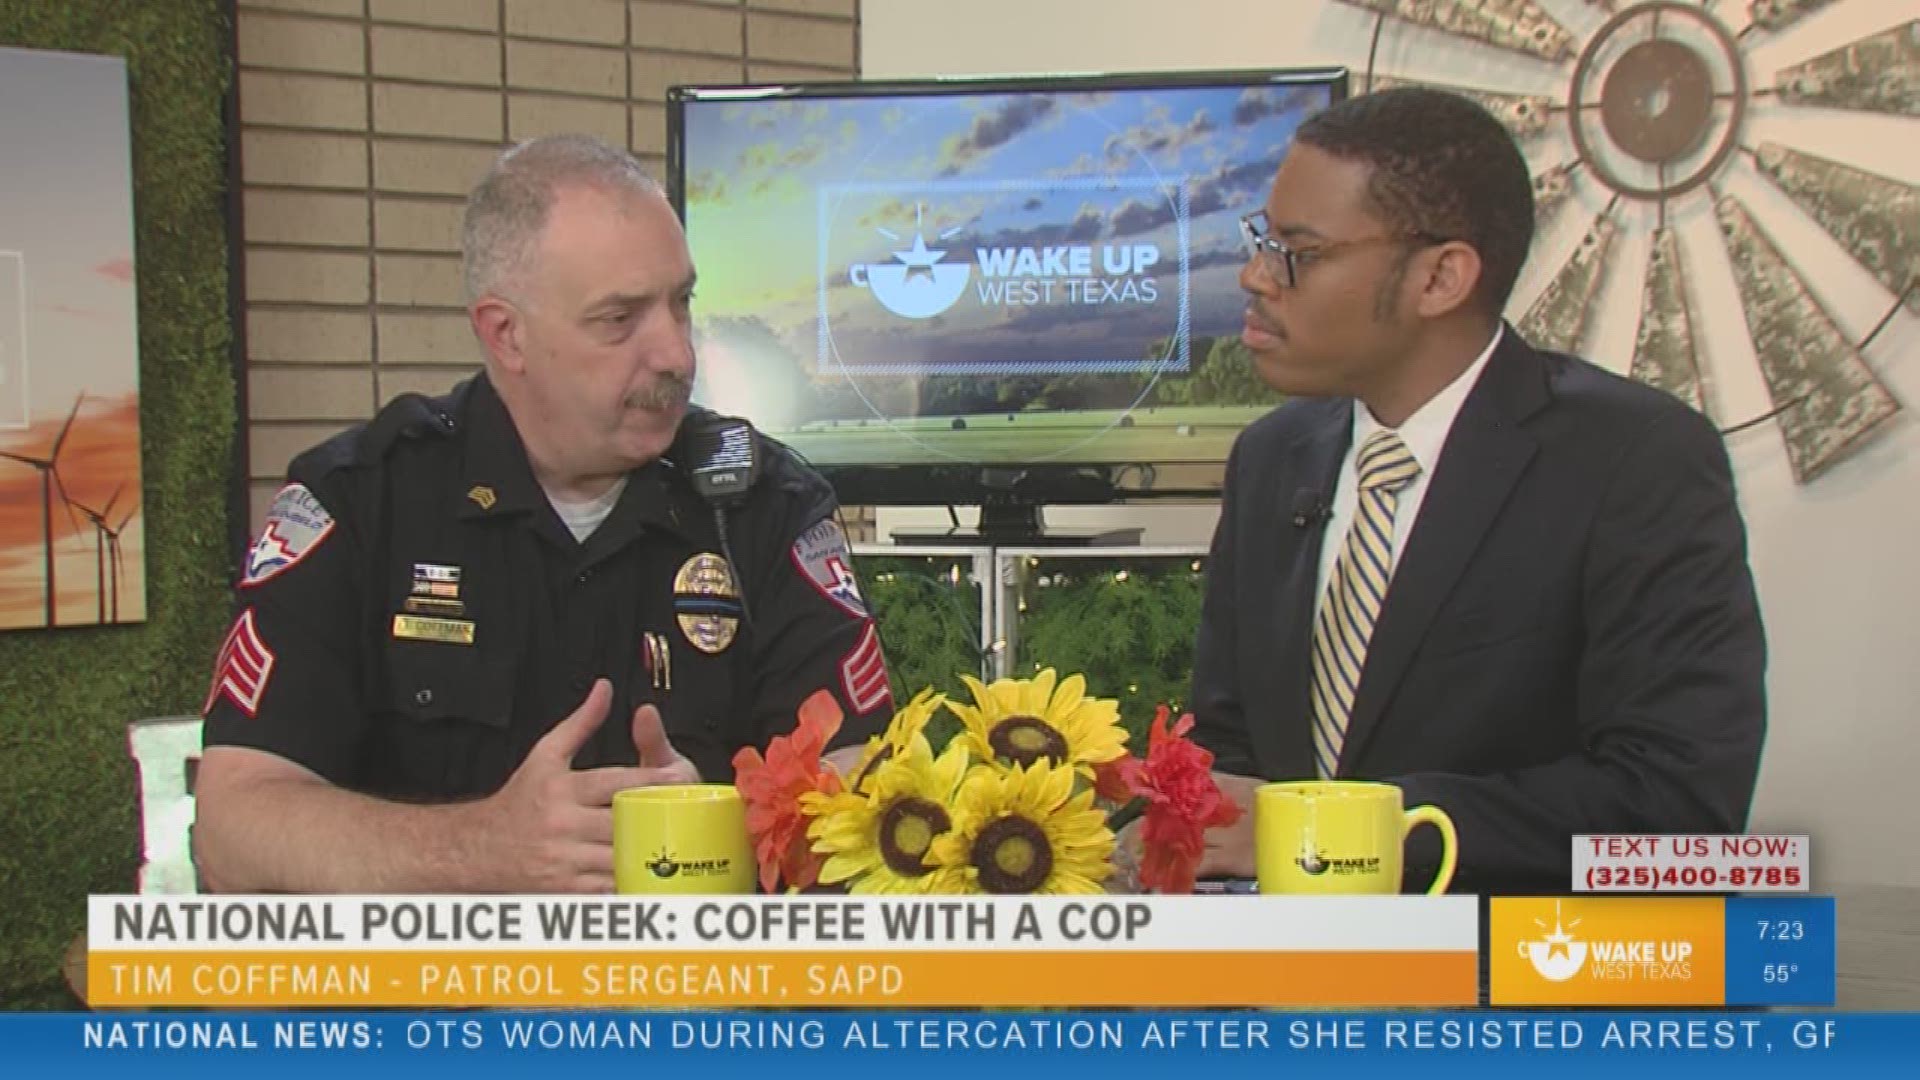 Our Malik Mingo spoke with a Sergeant from the San Angelo Police Department about its upcoming "Coffee with a Cop" event on May 15.